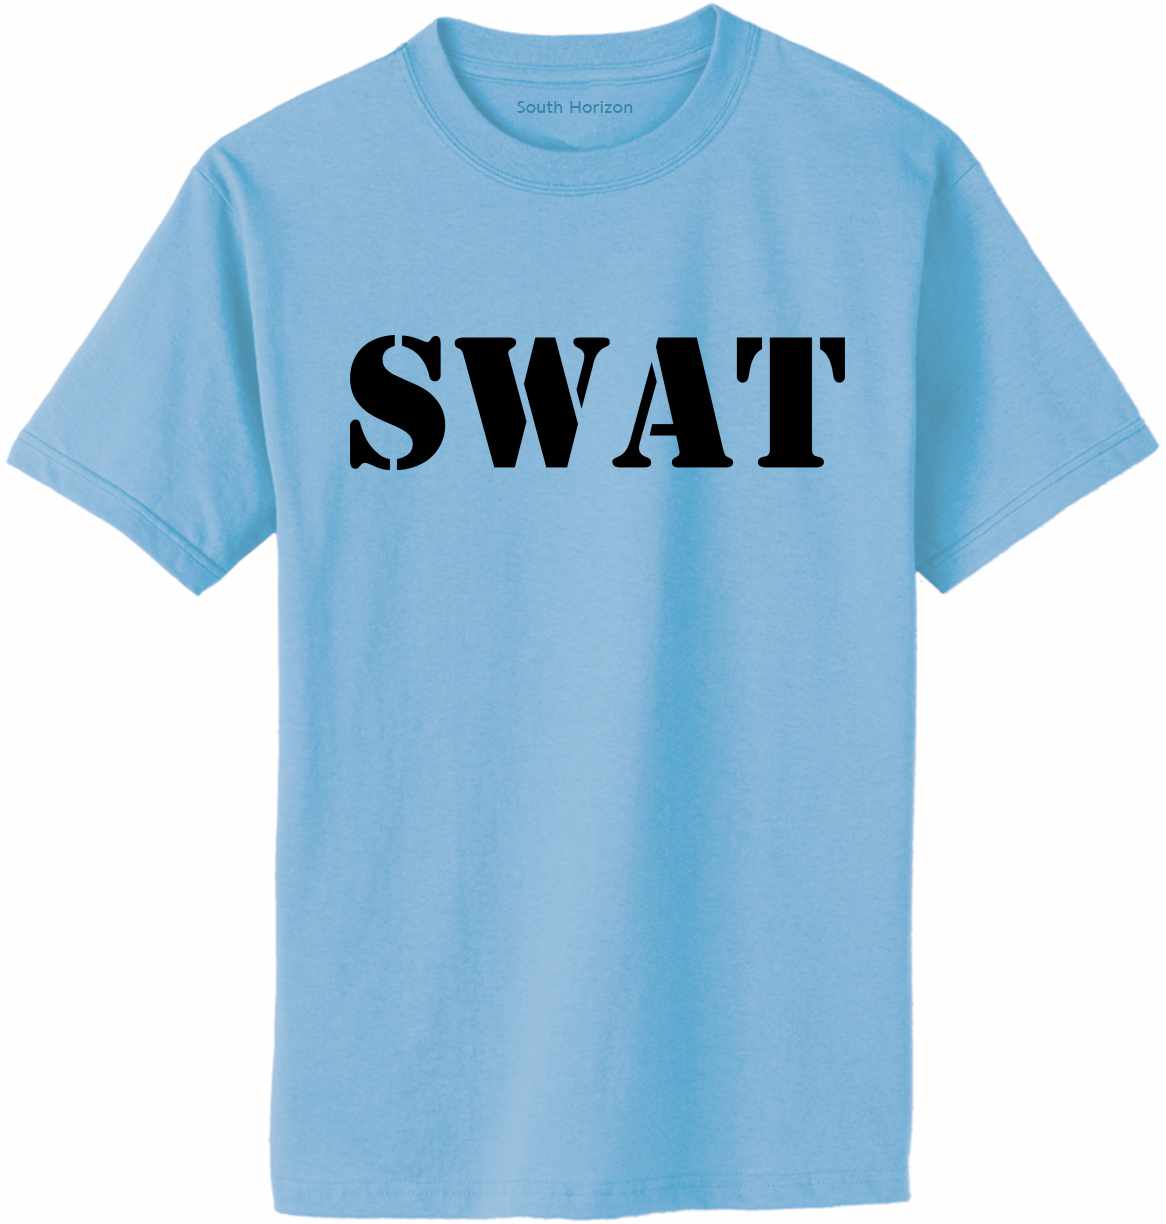 SWAT on Adult T-Shirt in Company 17 South – colors T-Shirt Horizon